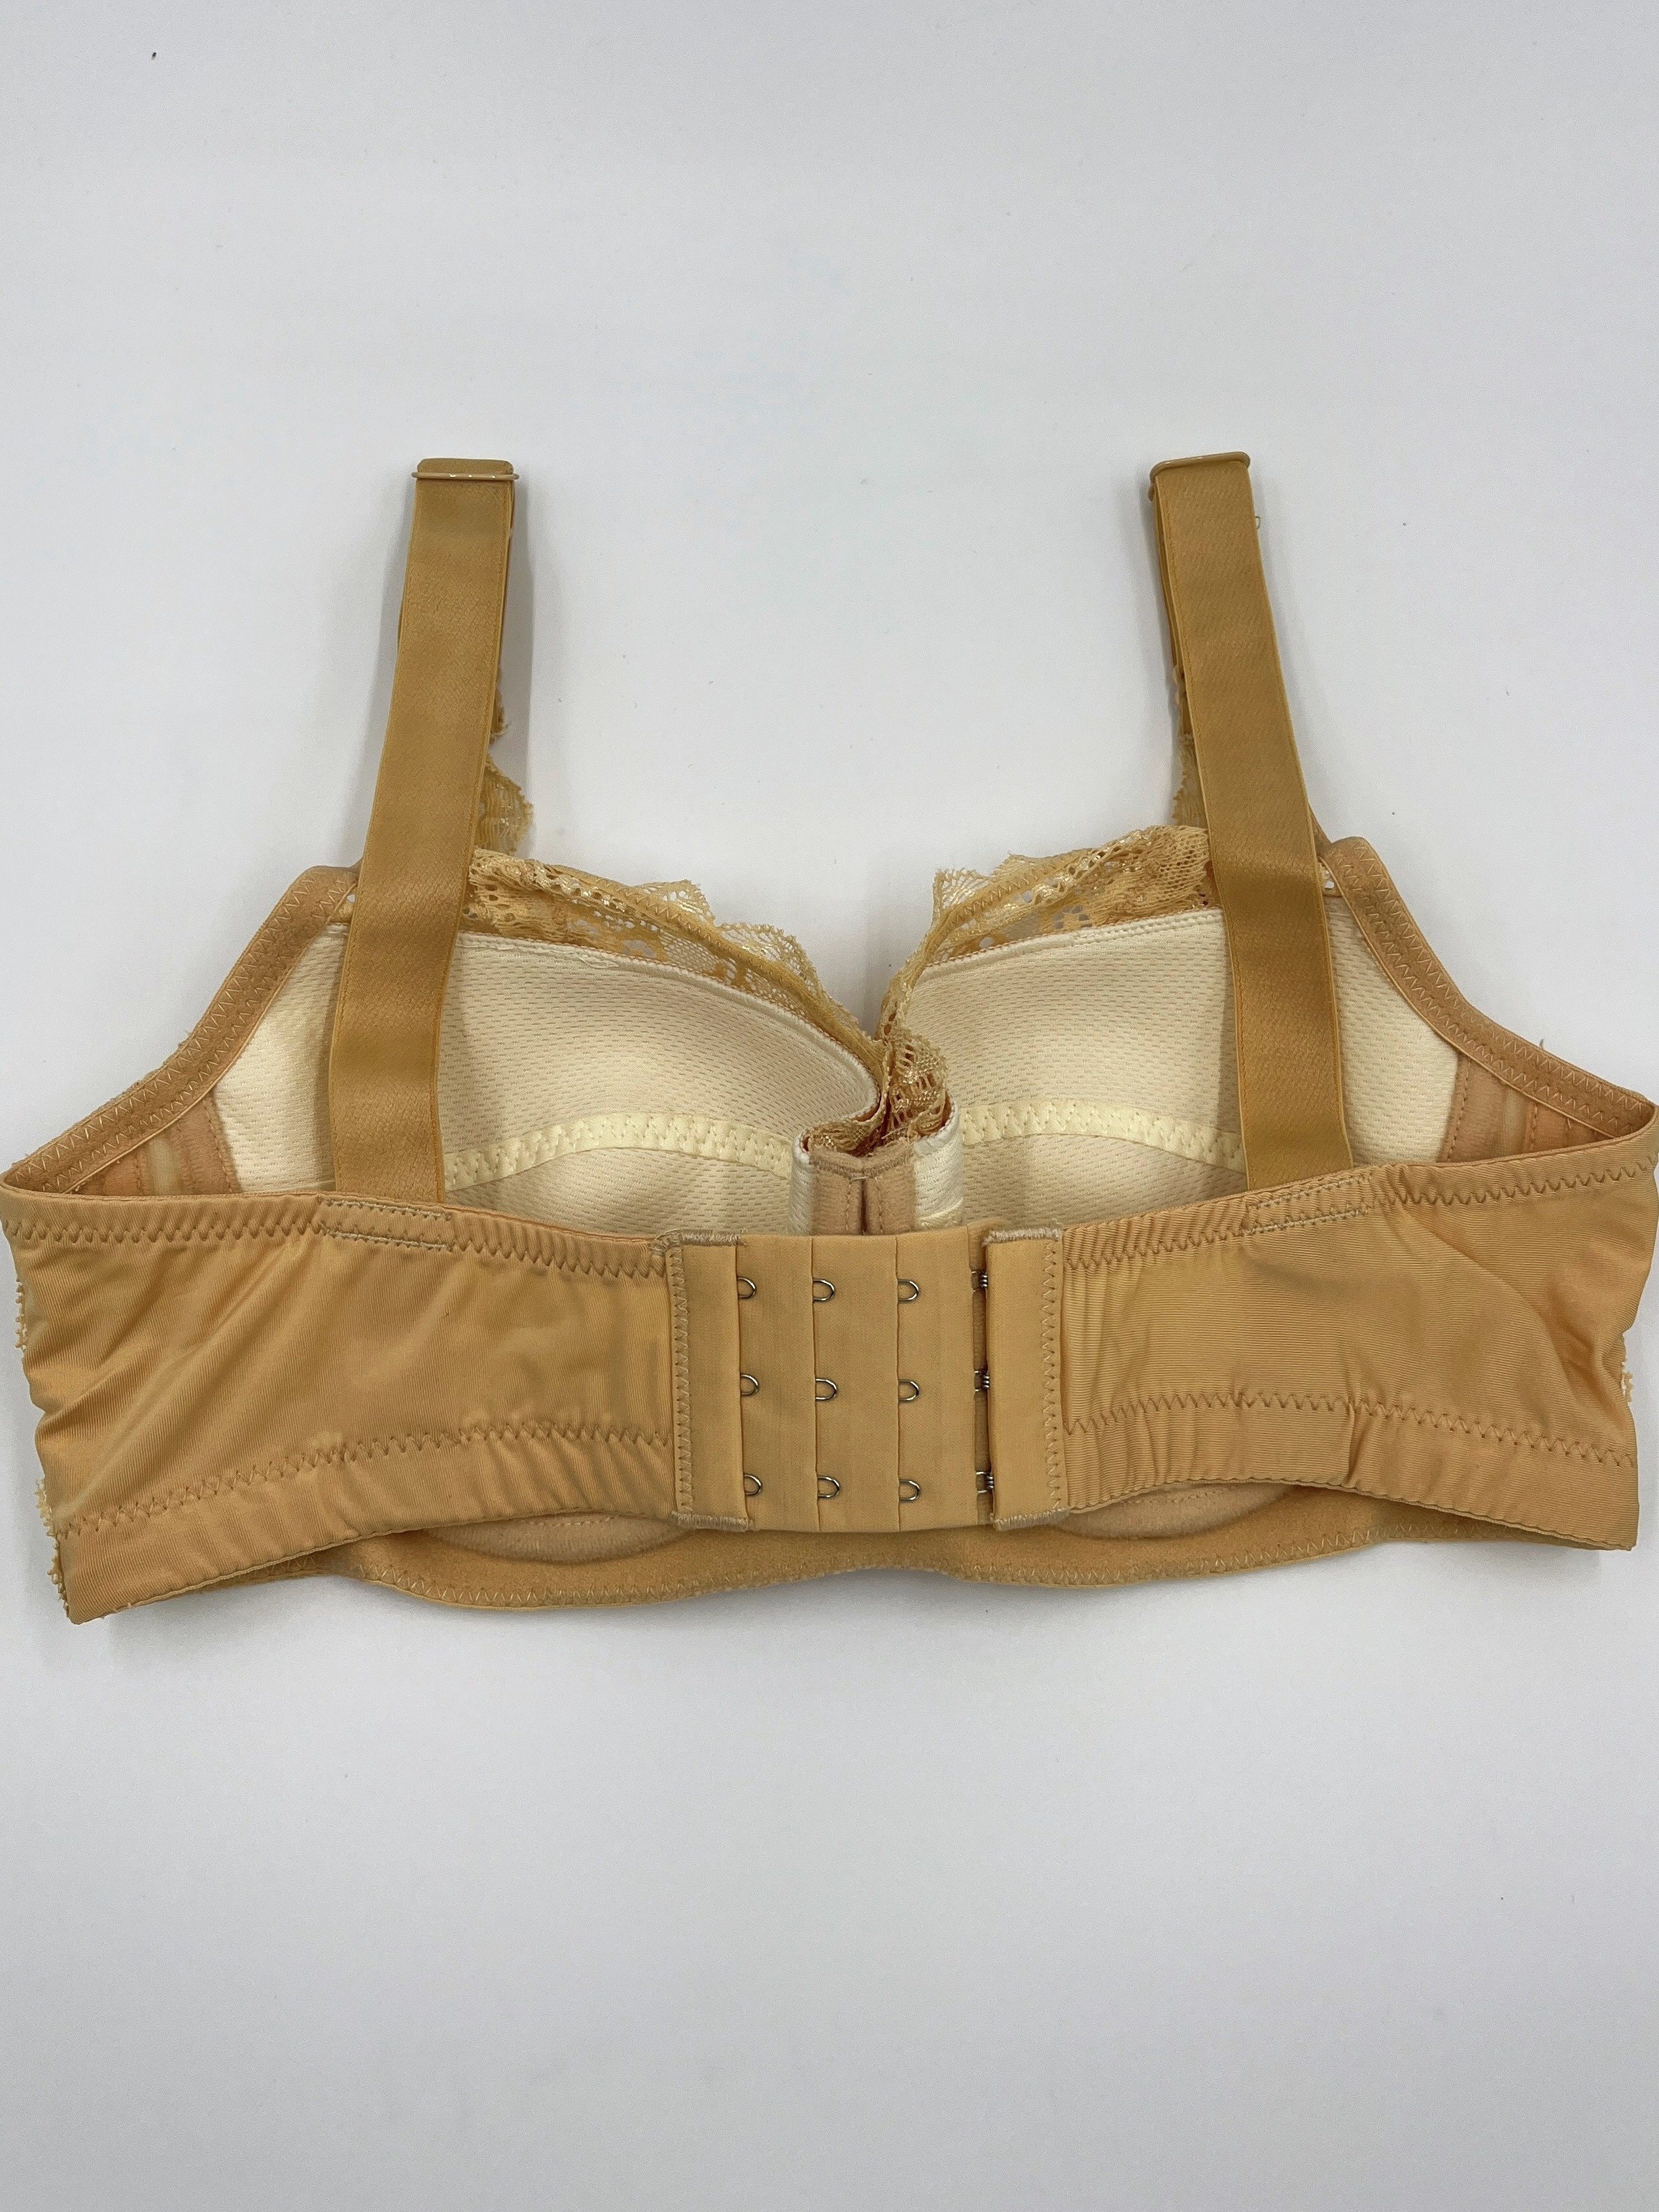 Ultra Thin Lace Bra And Panty Set Back With Stones Push Up Bandage Bra For  Women 2020 New Arrival A D Cup From Luo02, $12.53